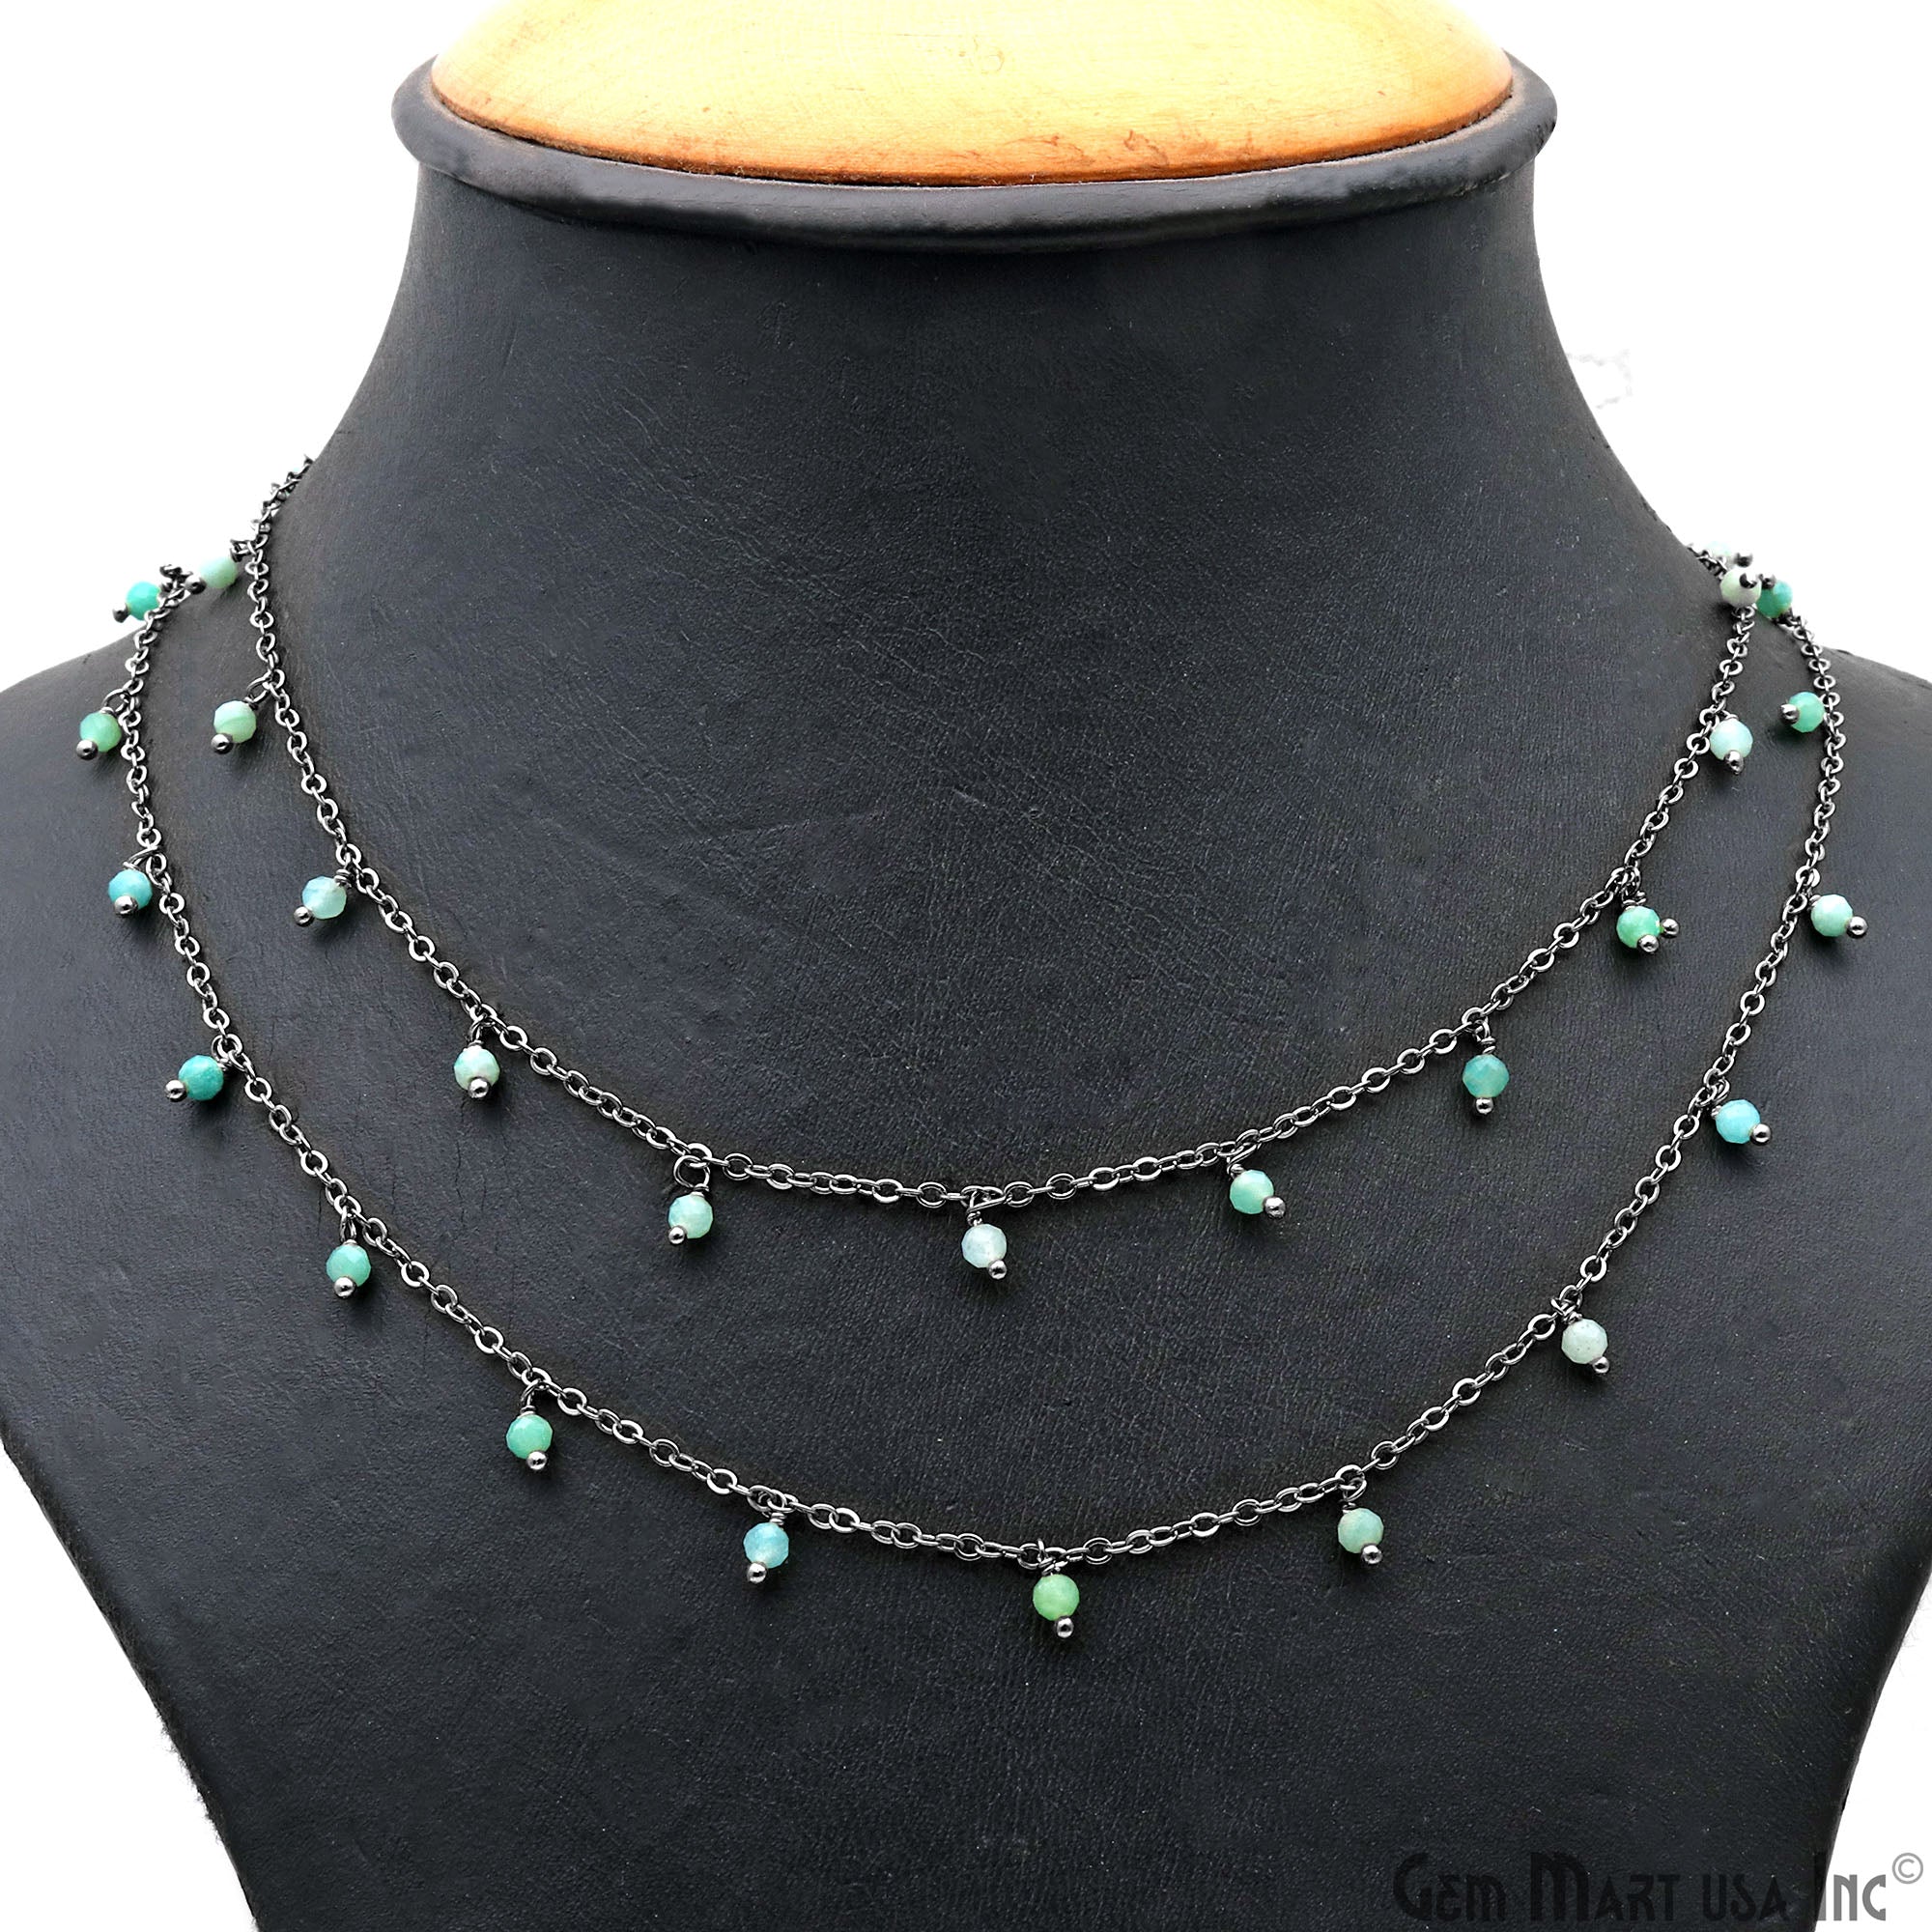 Chrysoprase Faceted Beads 3-4mm Oxidized Cluster Dangle Chain